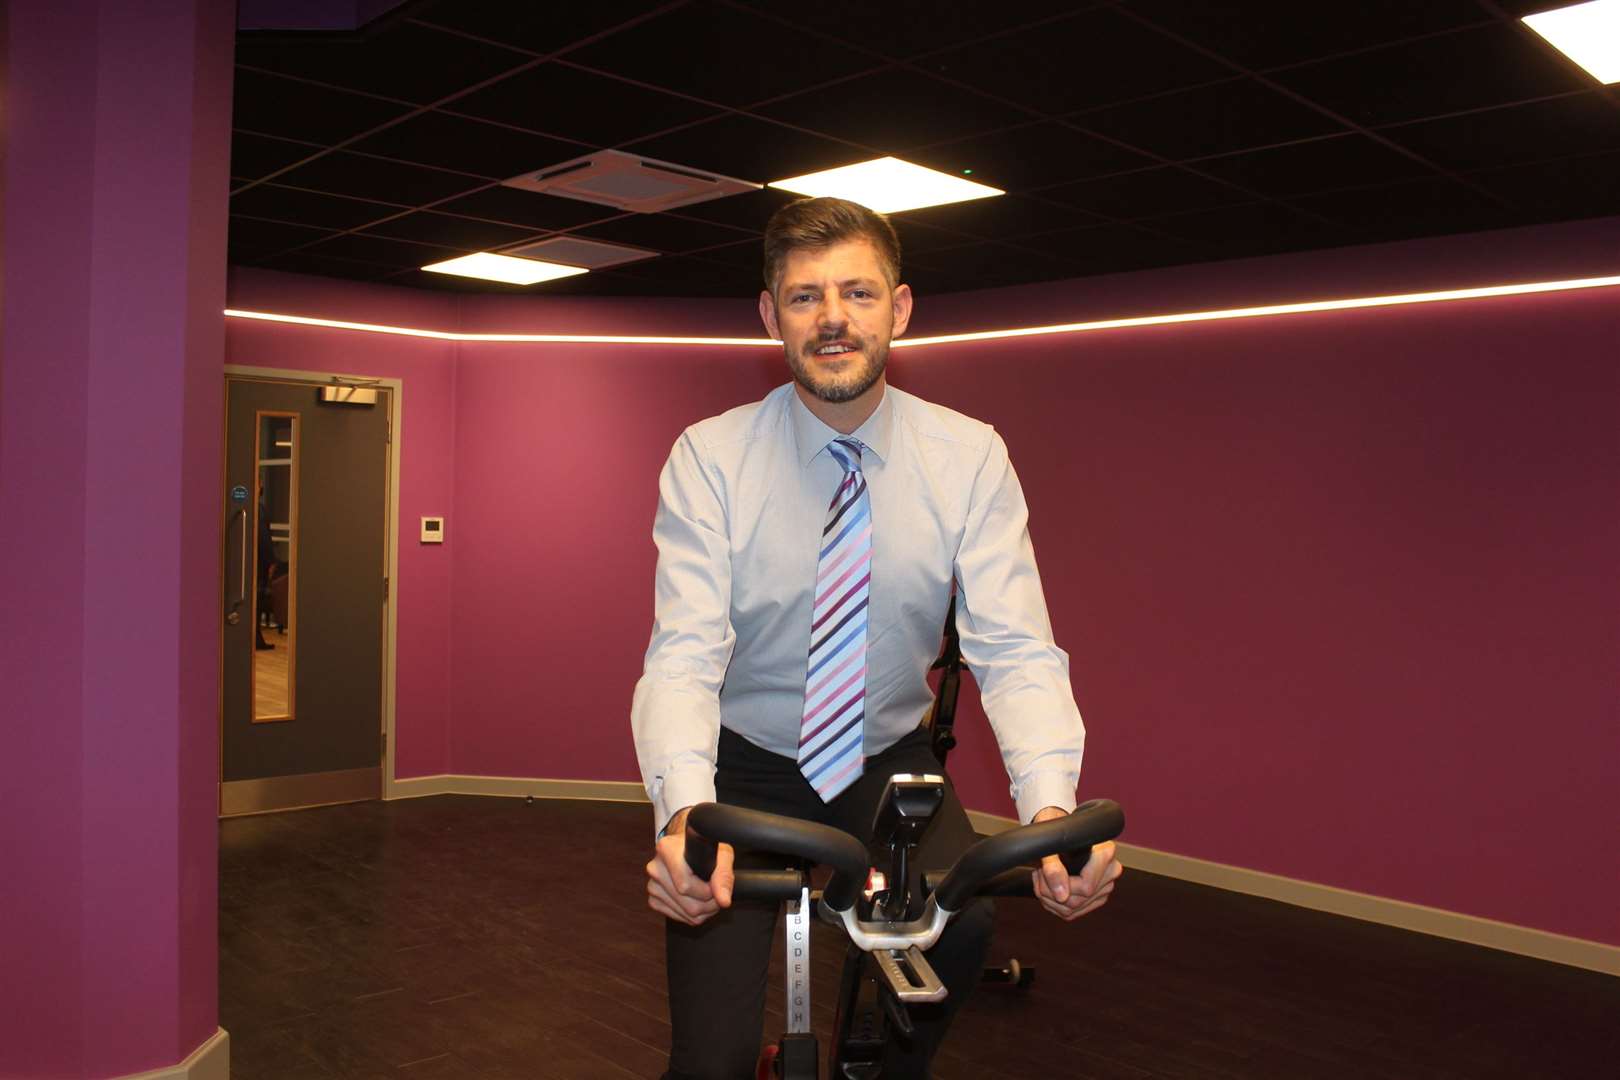 Cllr Matthew Forest tried out a static bike in a dedicated spin class studio